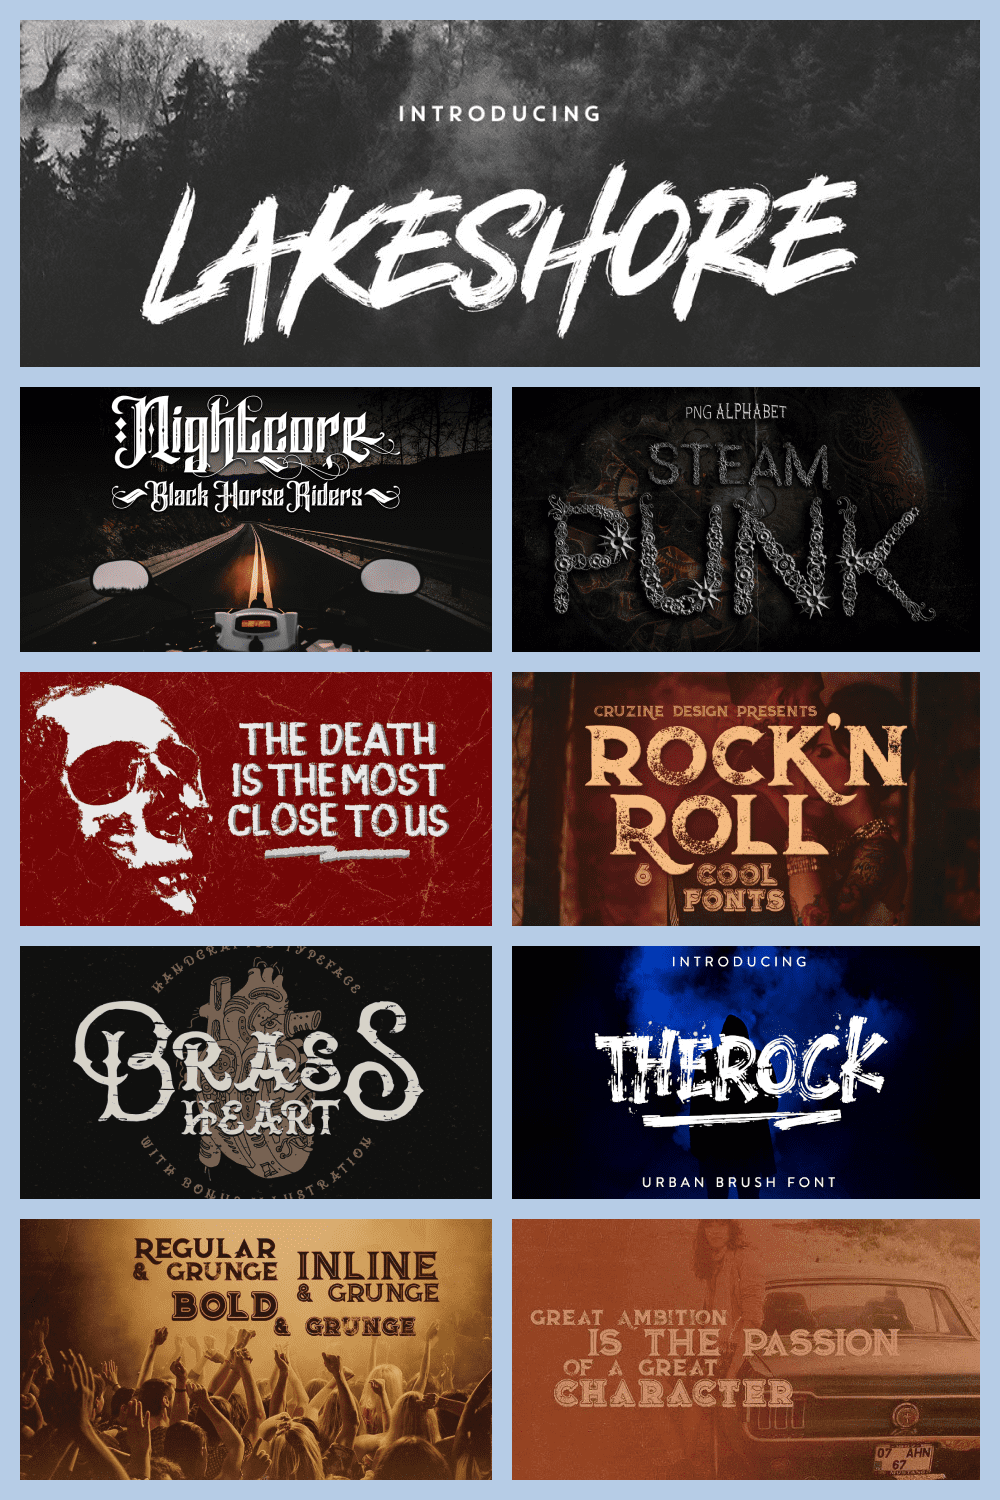 Rock and Roll fonts Pinterest.